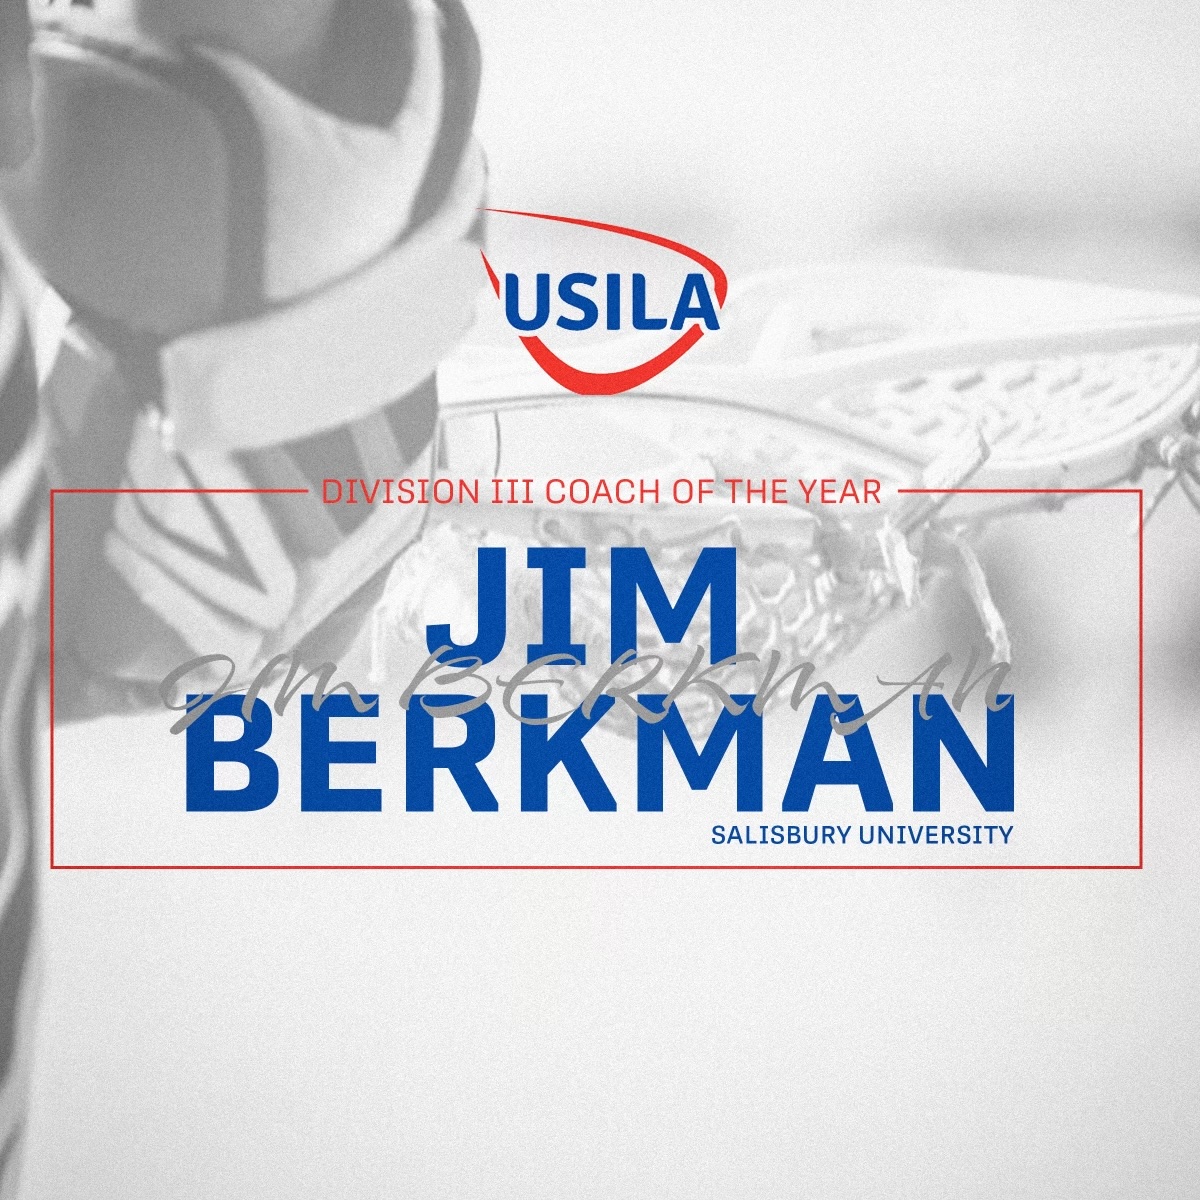 Now for the Coach of the Year awards...The 2023 USILA Division III Coach of the Year goes to...Jim Berkman, Salisbury University!